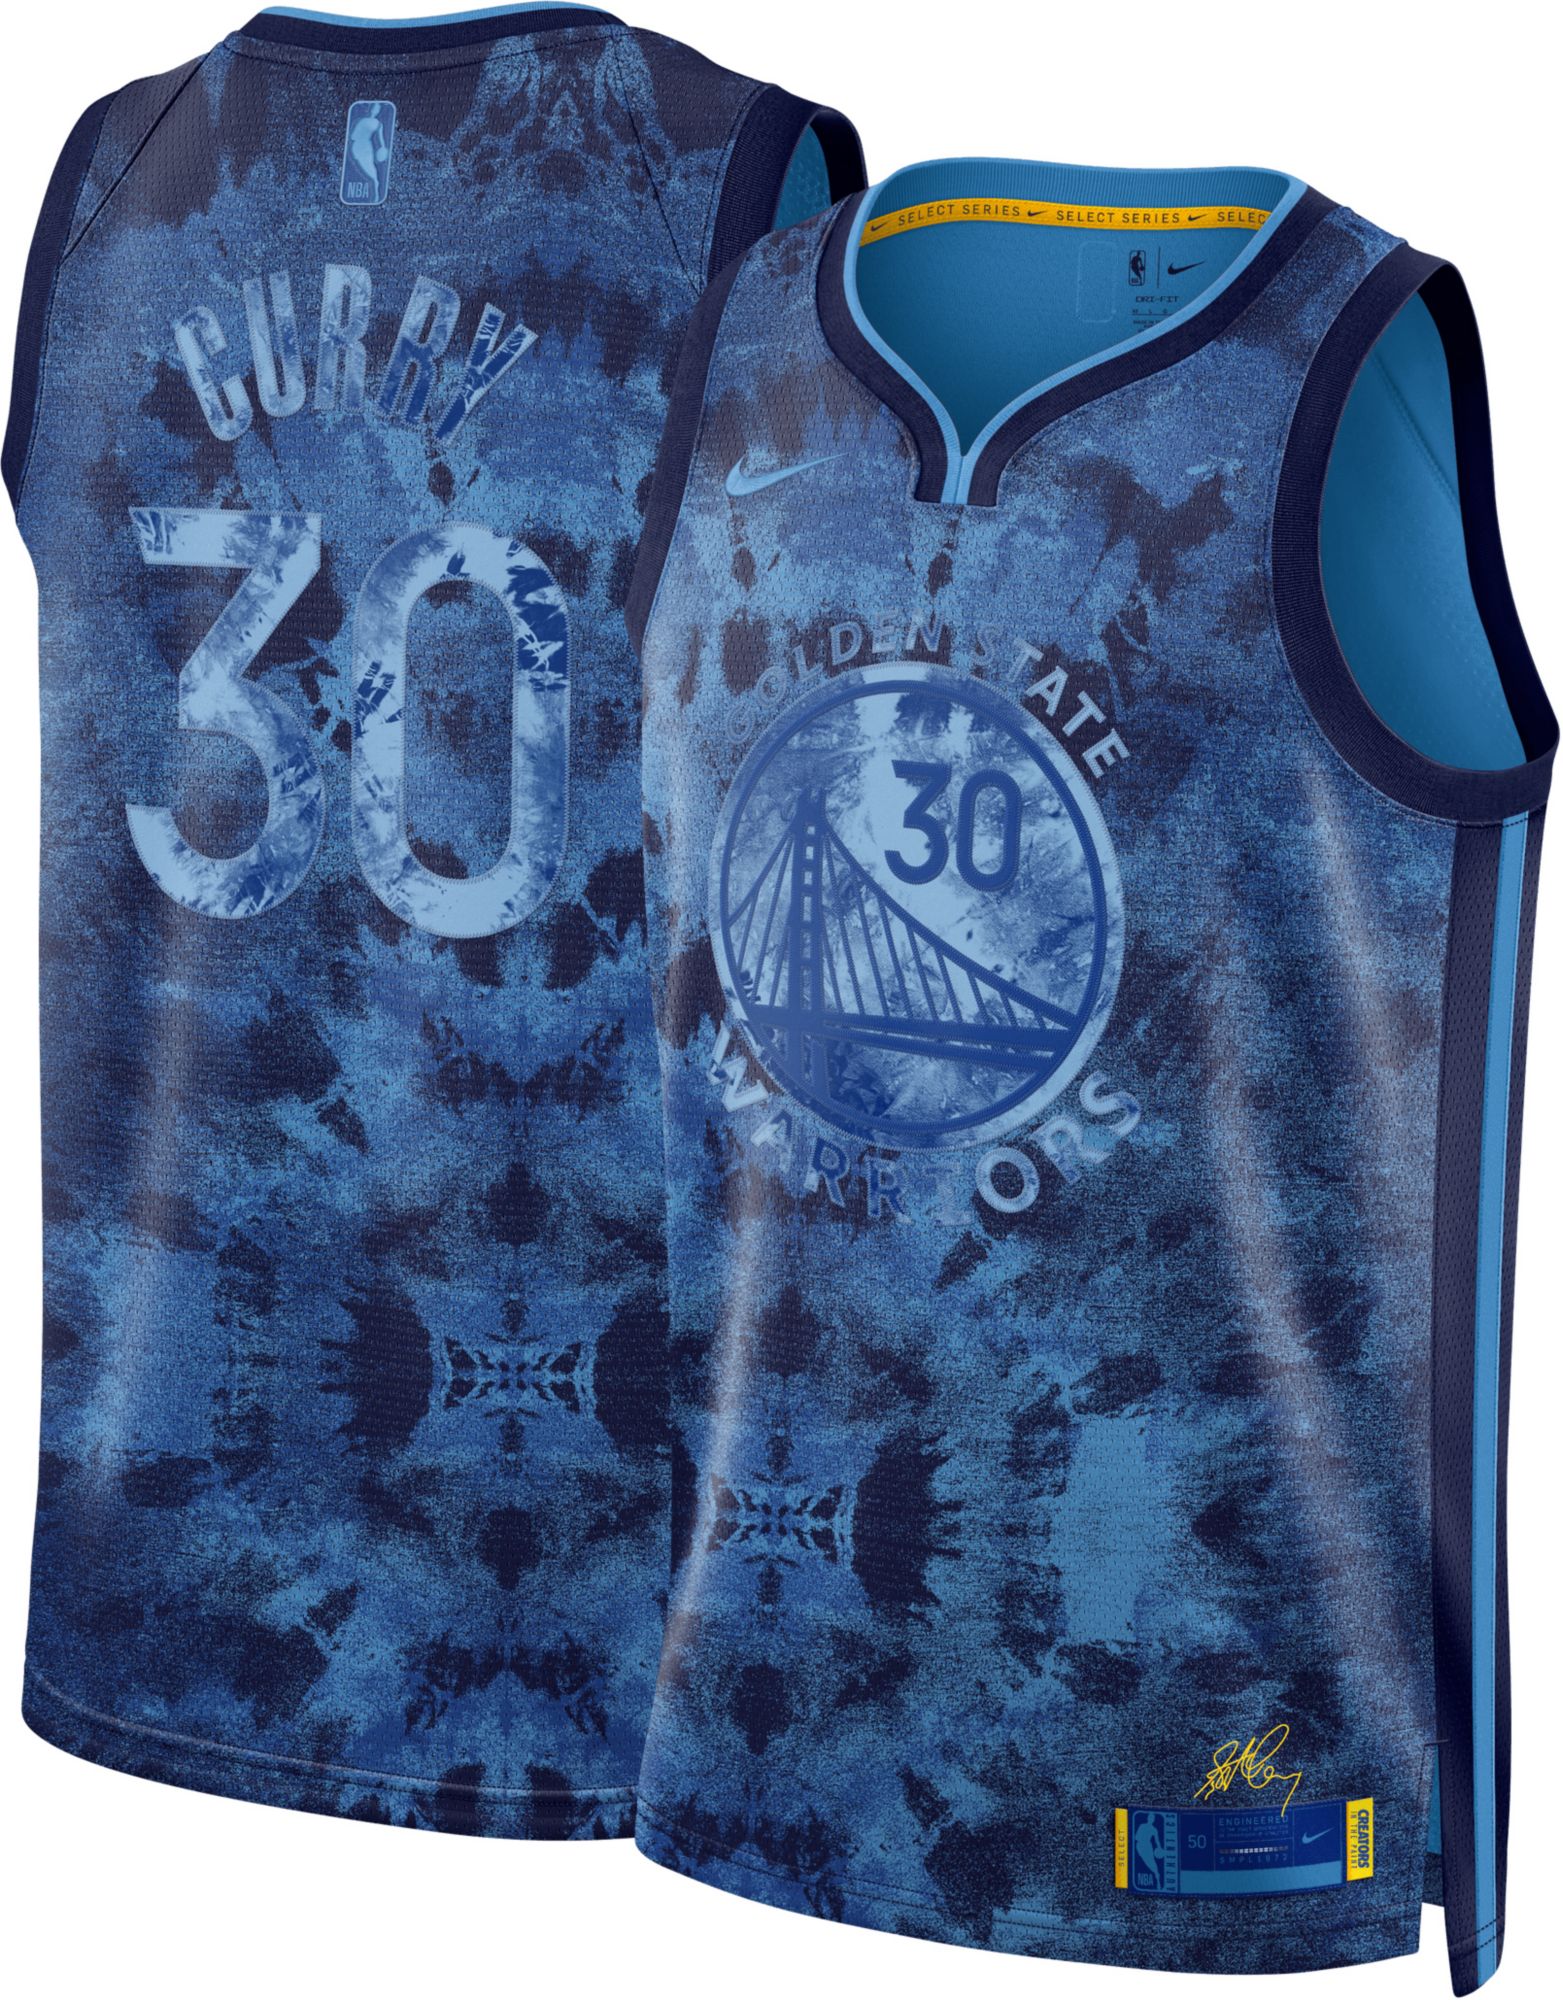 Curry GSW 21-22 City Edition Concept Jersey